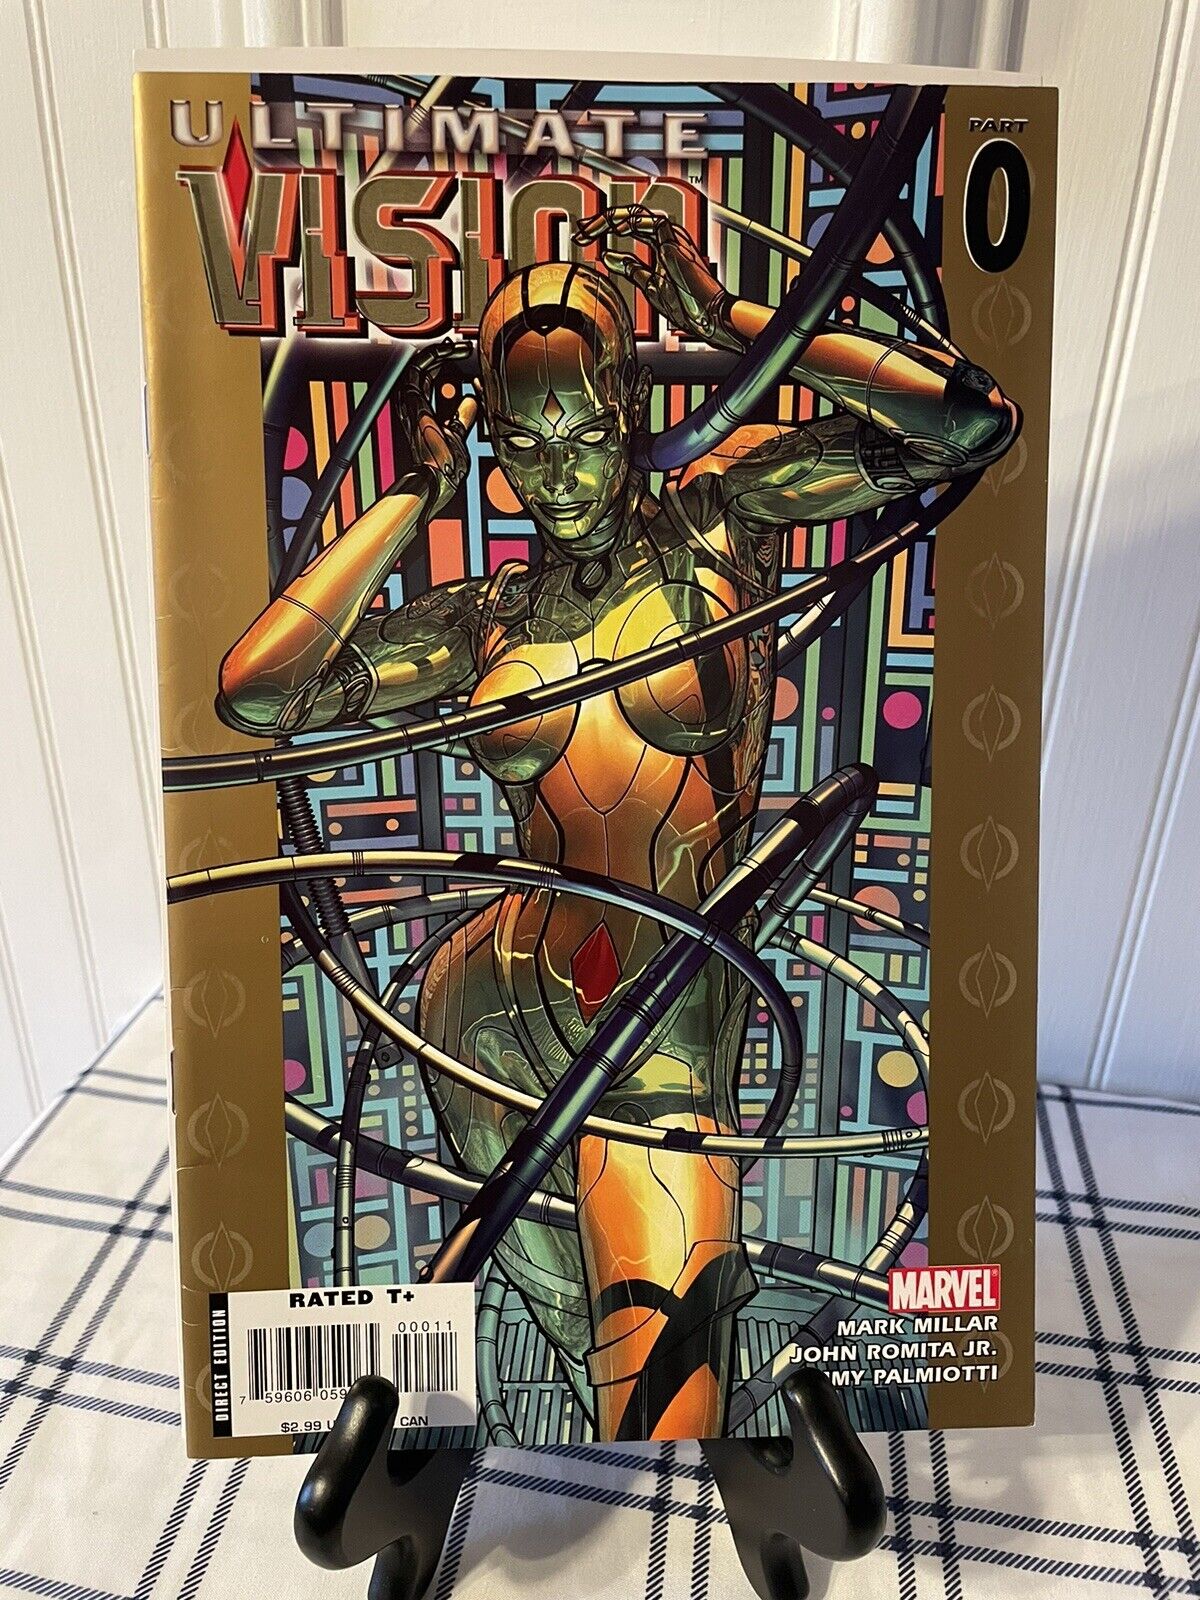 ULTIMATE VISION #0 January 2007 Marvel Comics Direct Edition